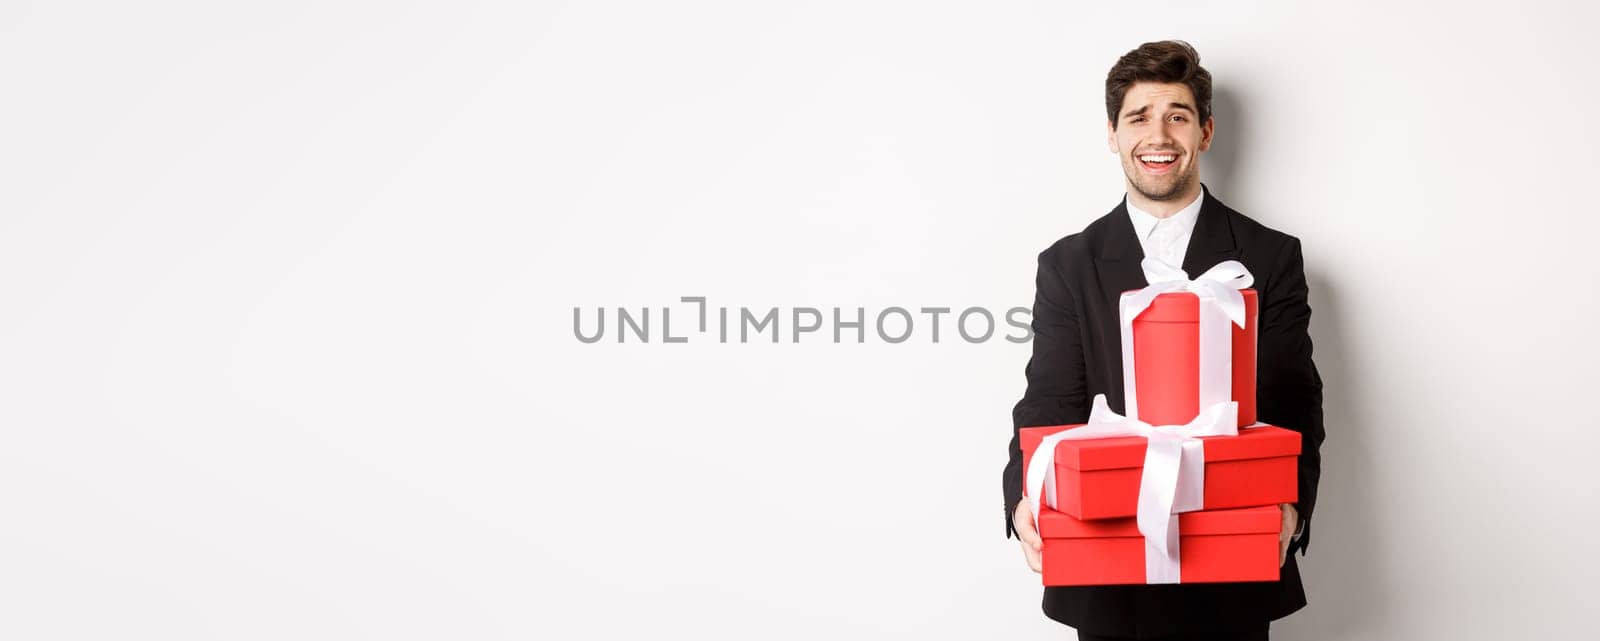 Image of handsome guy in black suit, holding gifts for christmas holidays, standing against white background.